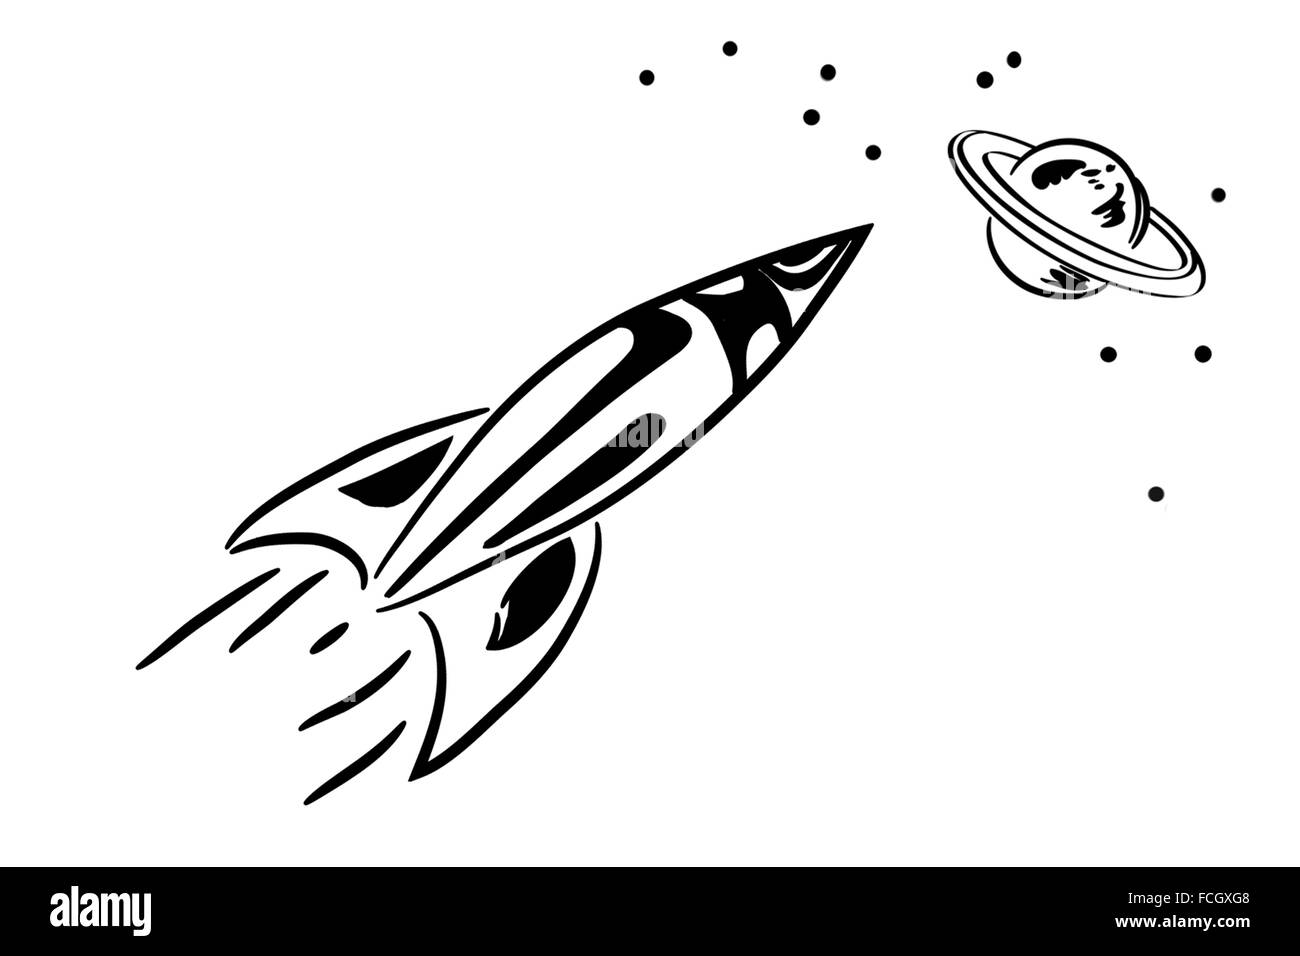 How to draw Space Shuttle